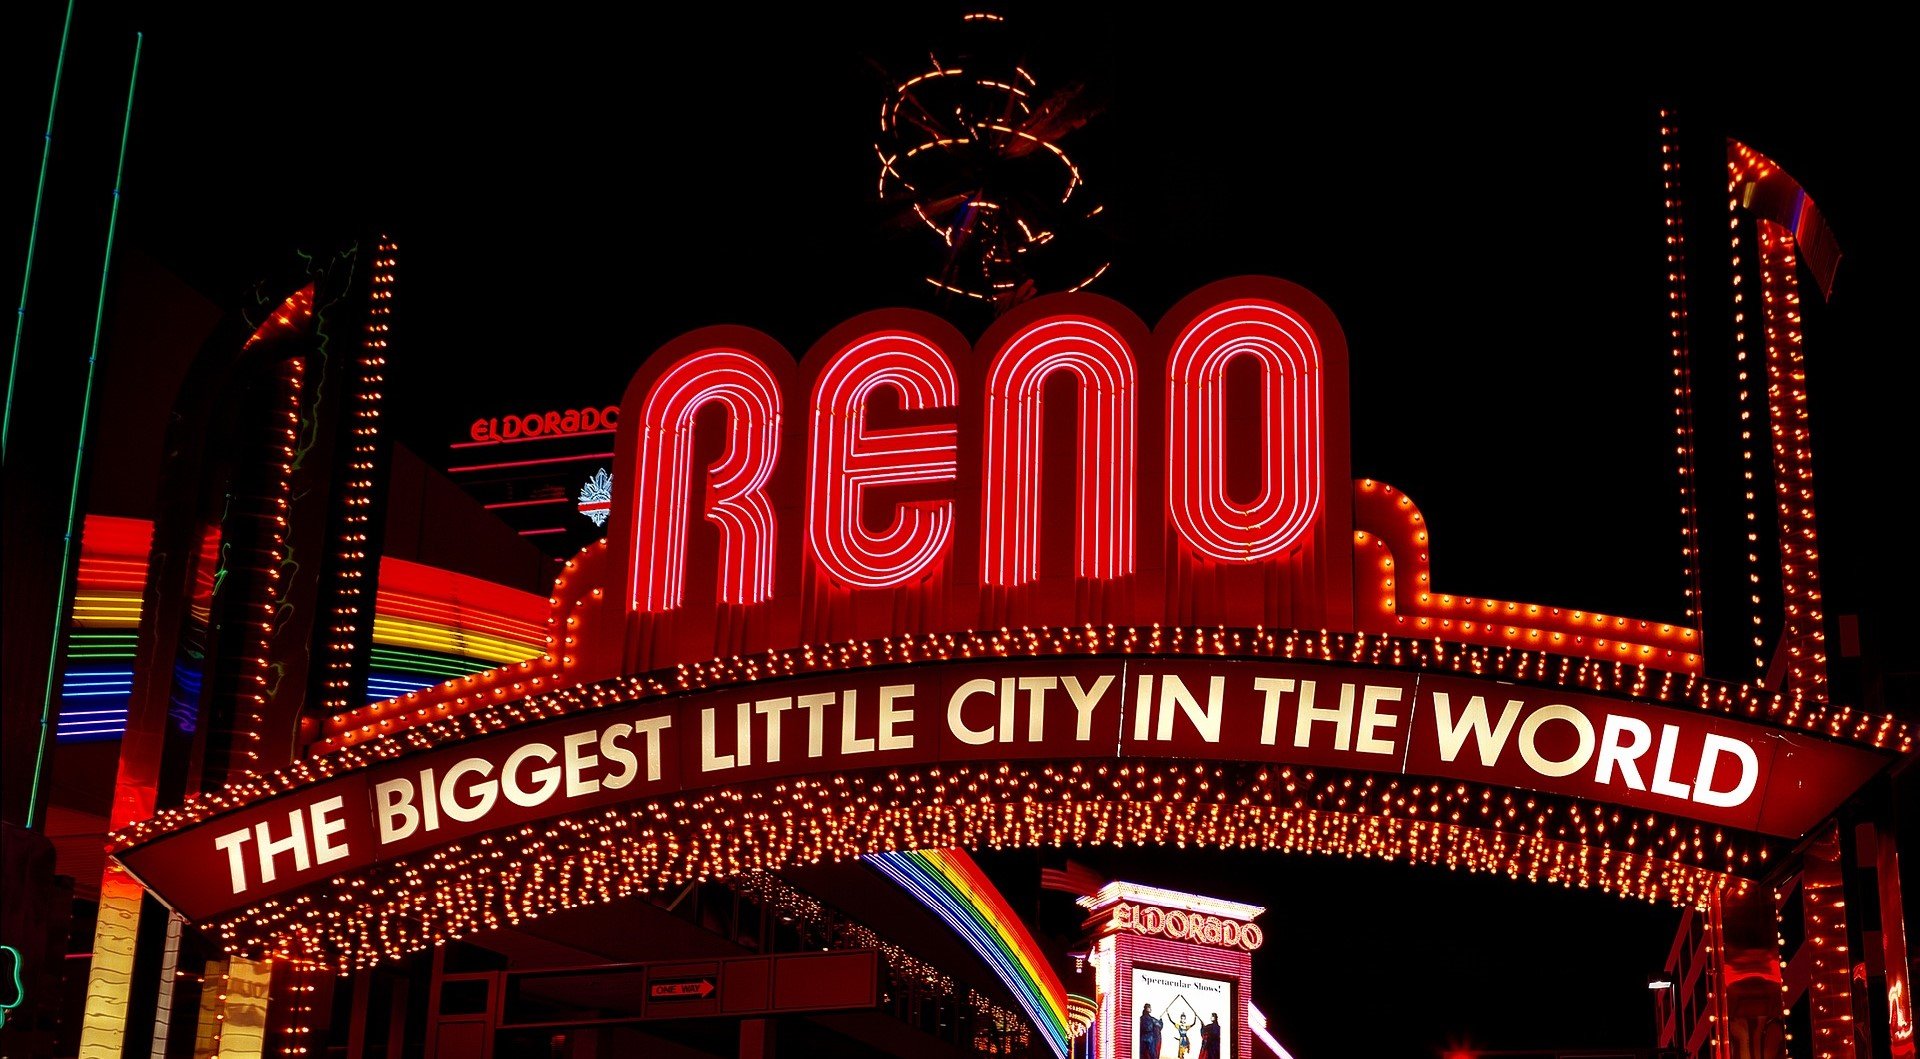 The Famous "The Biggest Little City in the World" Sign in Reno - VeteranCarDonations.org